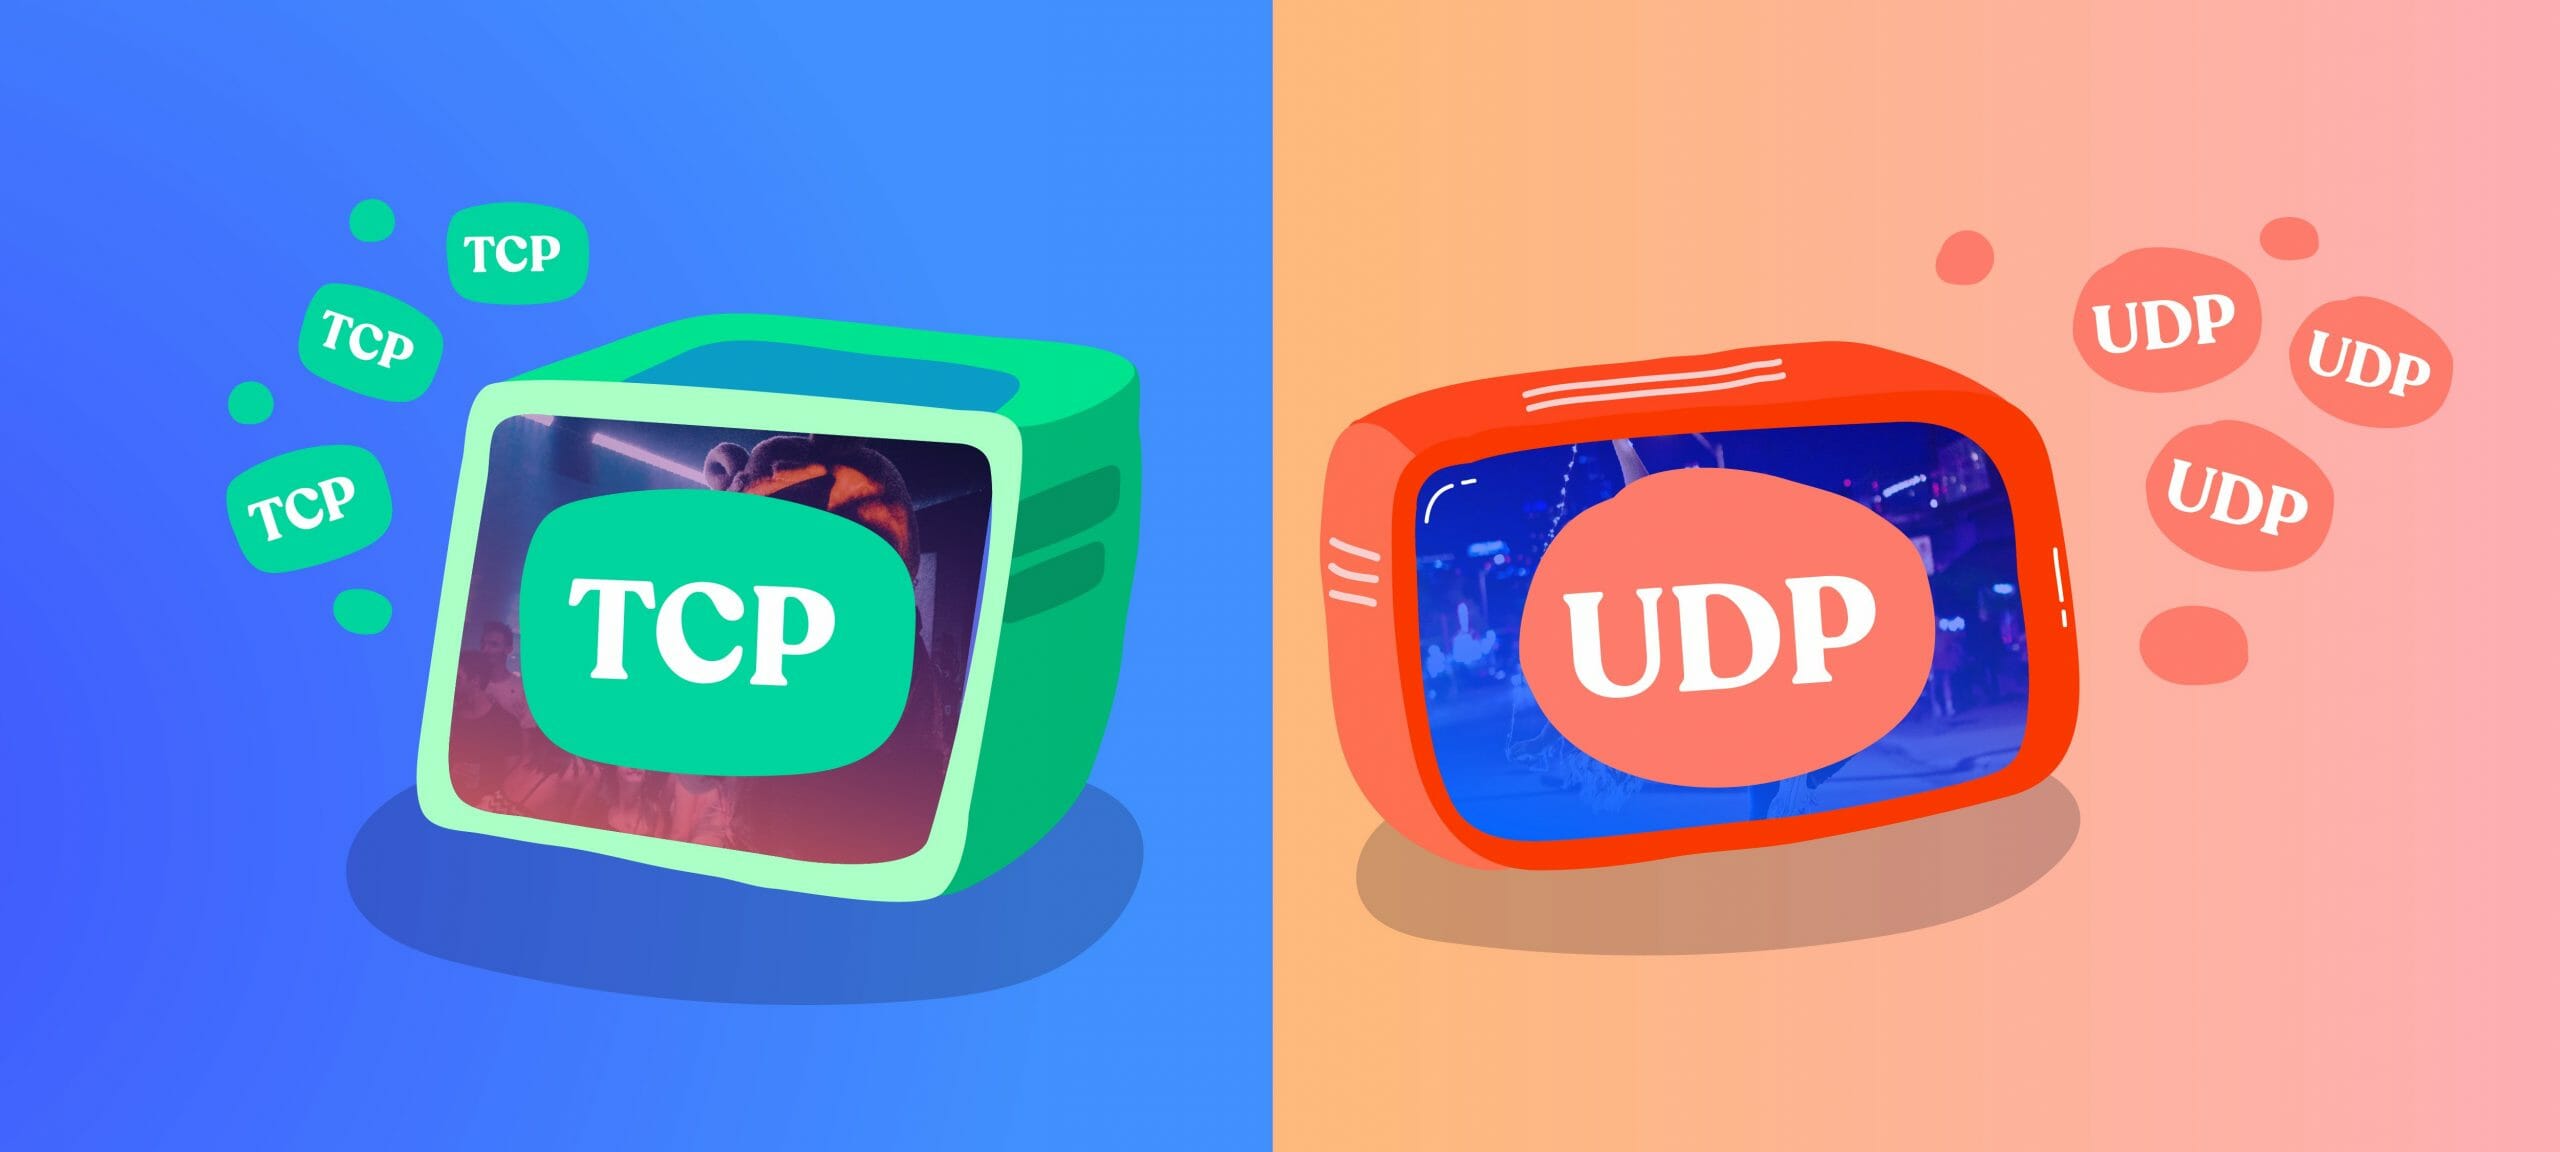 Do Online Games Use Tcp Or Udp